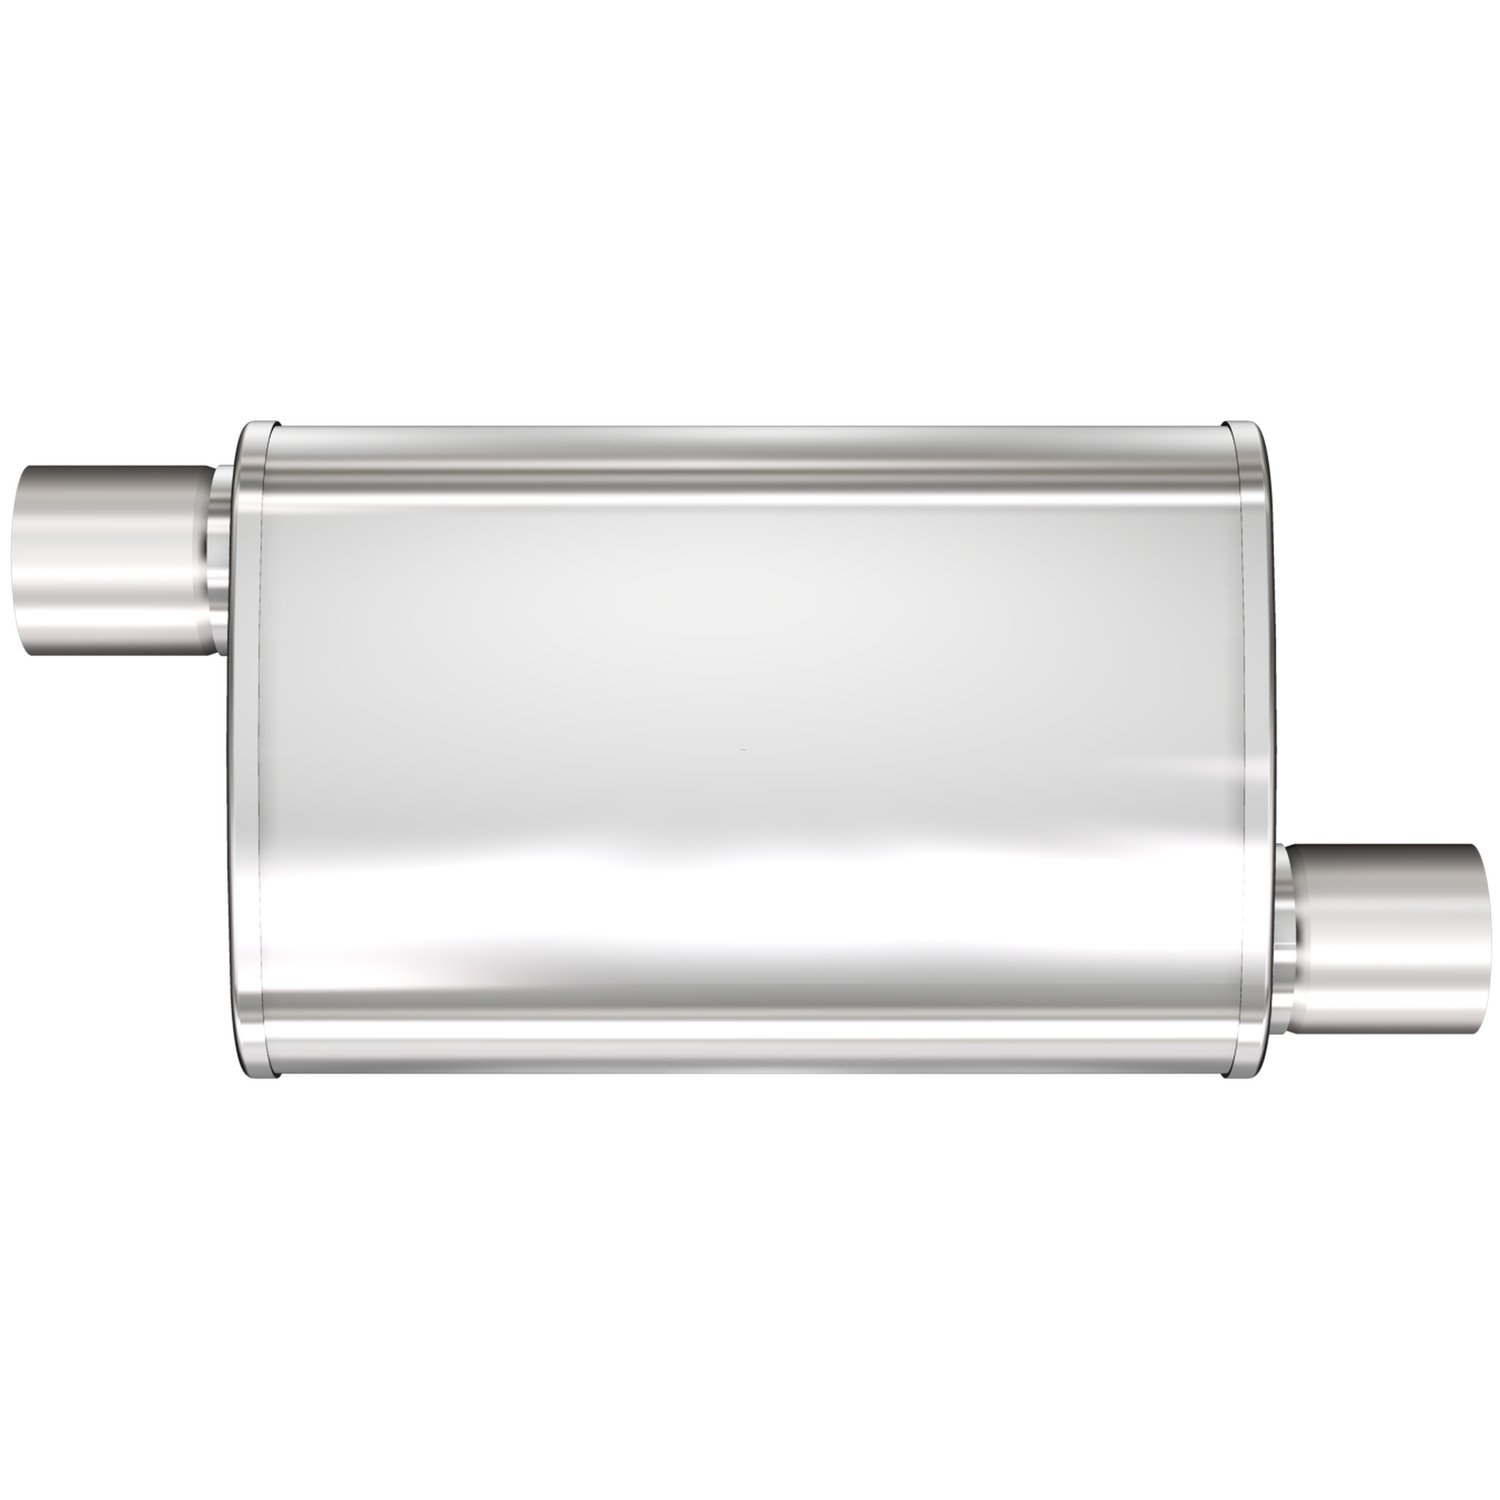 4" x 9" Oval XL 3-Chamber Muffler Offset In/Offset Out: 2.25"/2.25" Body Length: 18" Overall Length: 24" Satin Finish